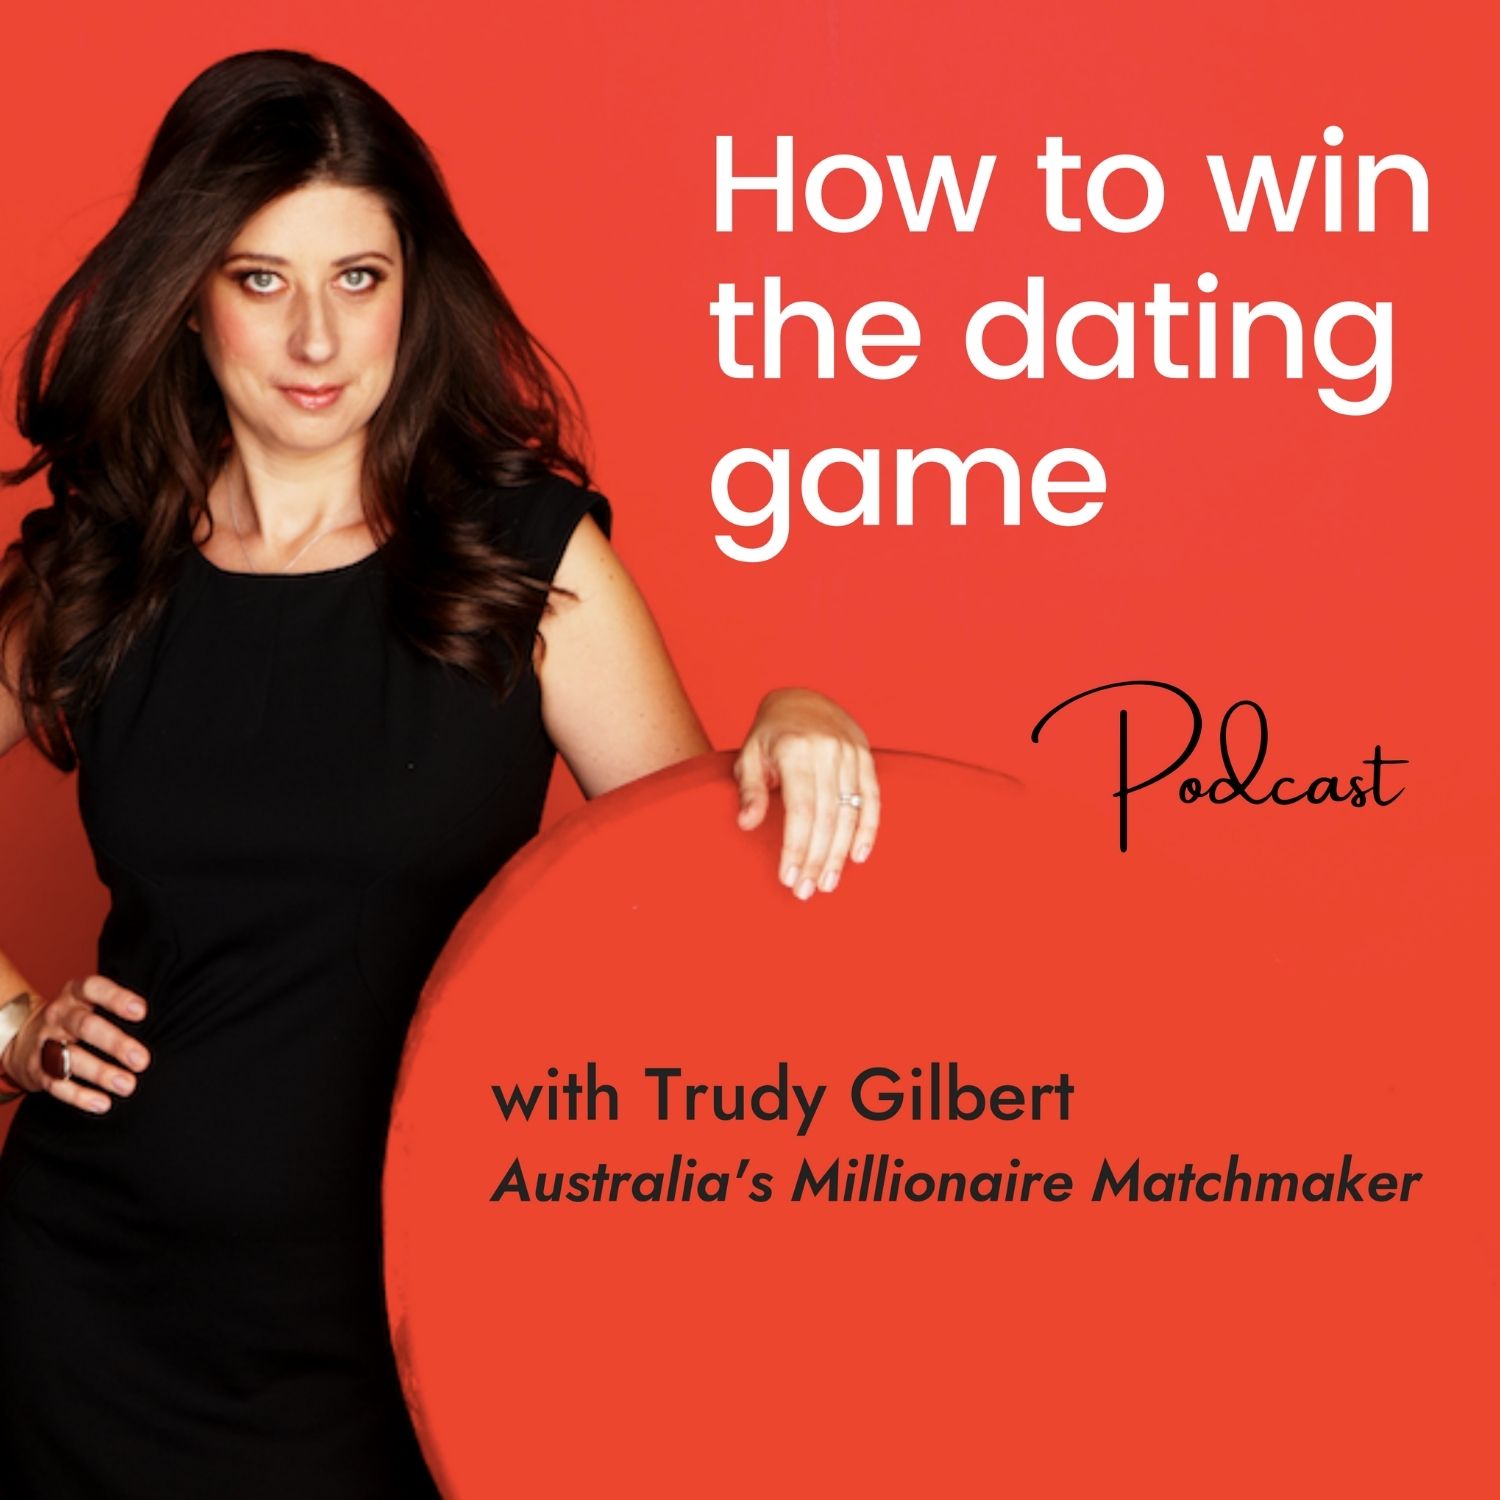 How to win the dating game